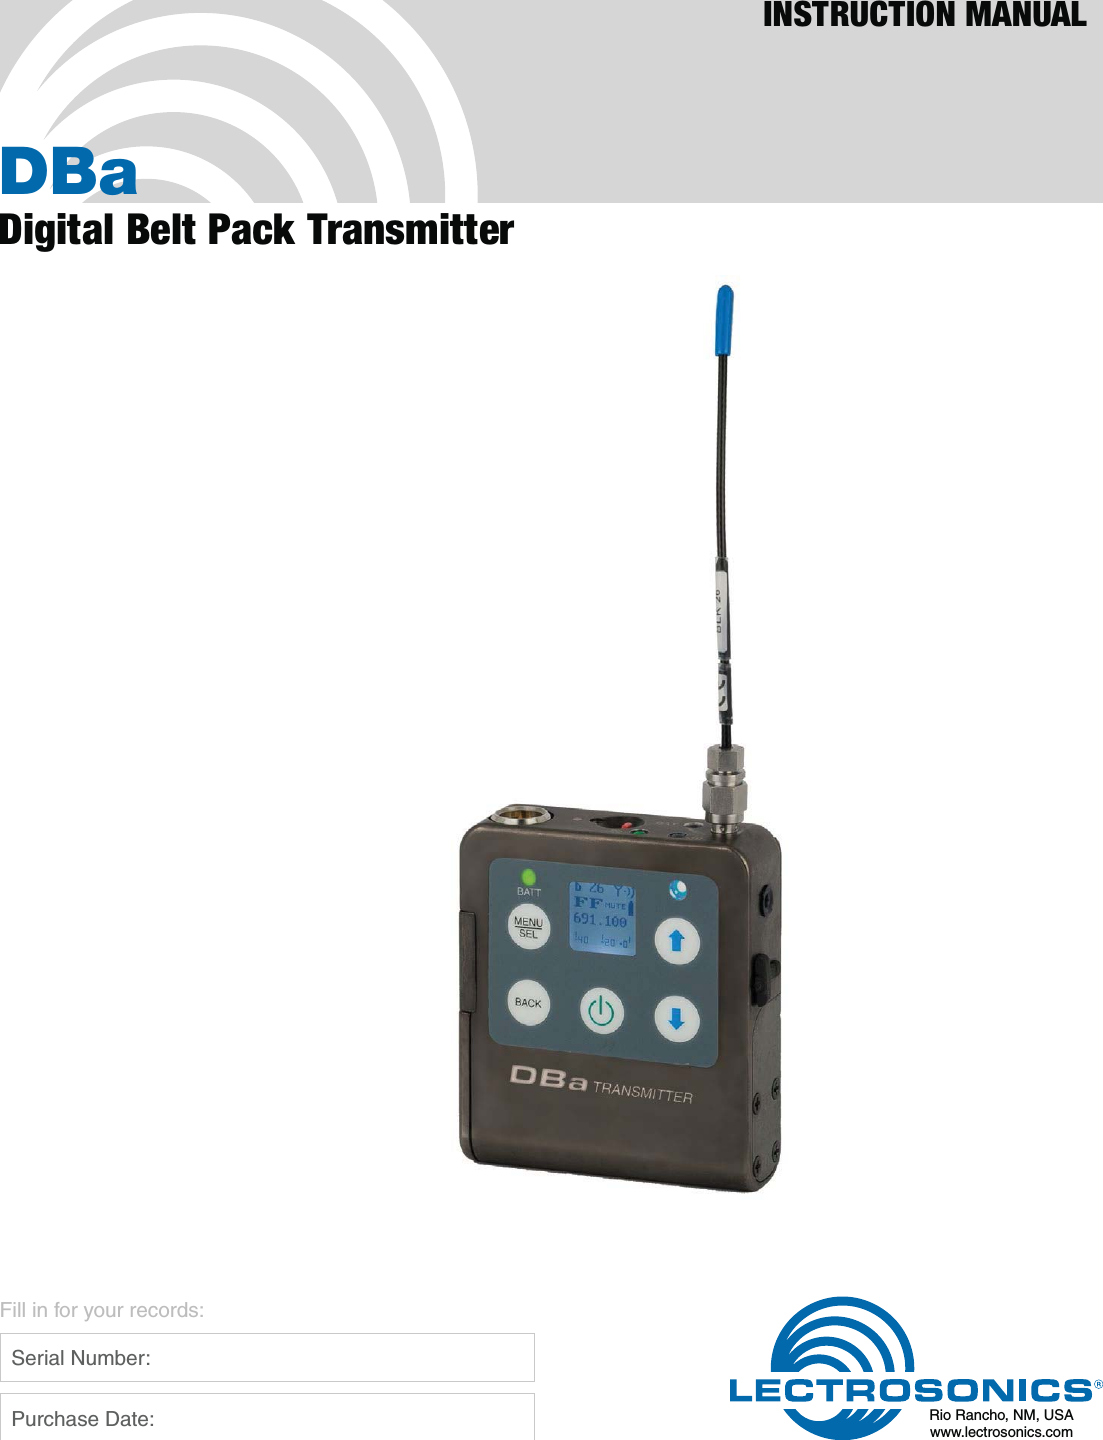 DBaDigital Belt Pack TransmitterINSTRUCTION MANUALRio Rancho, NM, USAwww.lectrosonics.comFill in for your records:  Serial Number:  Purchase Date: